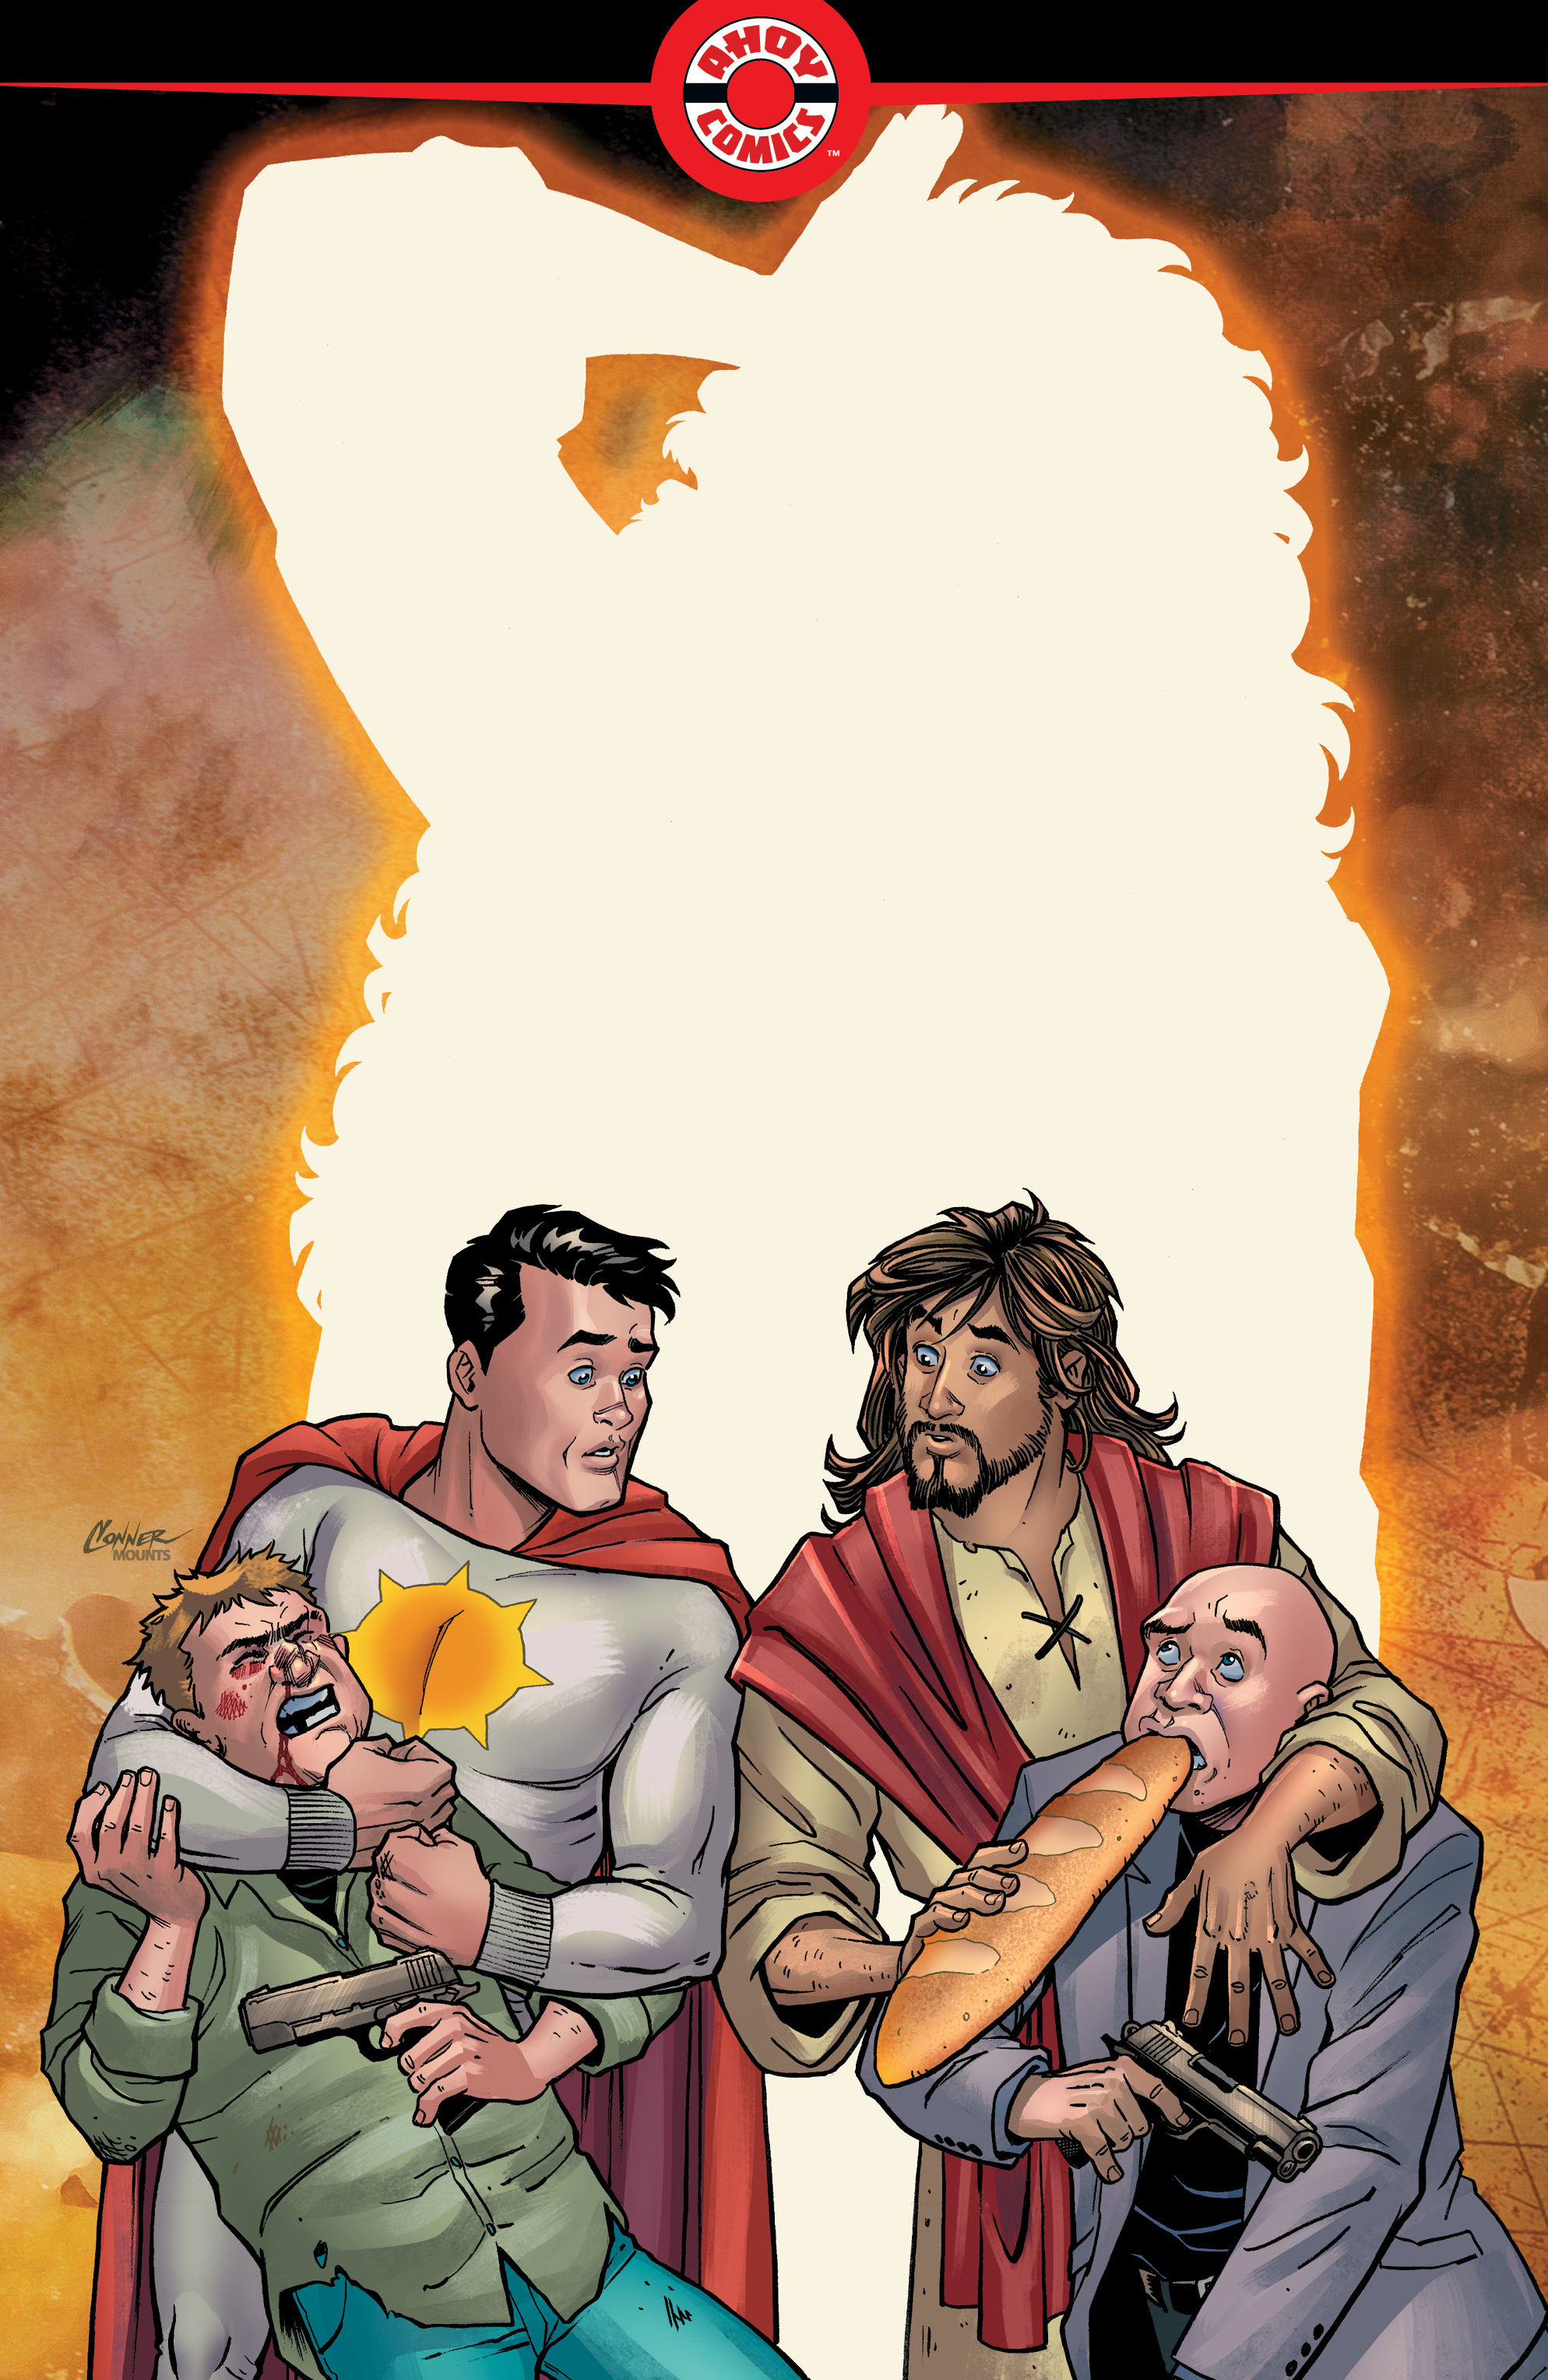 How a cancelled comic about Jesus and superheroes found new life - Polygon